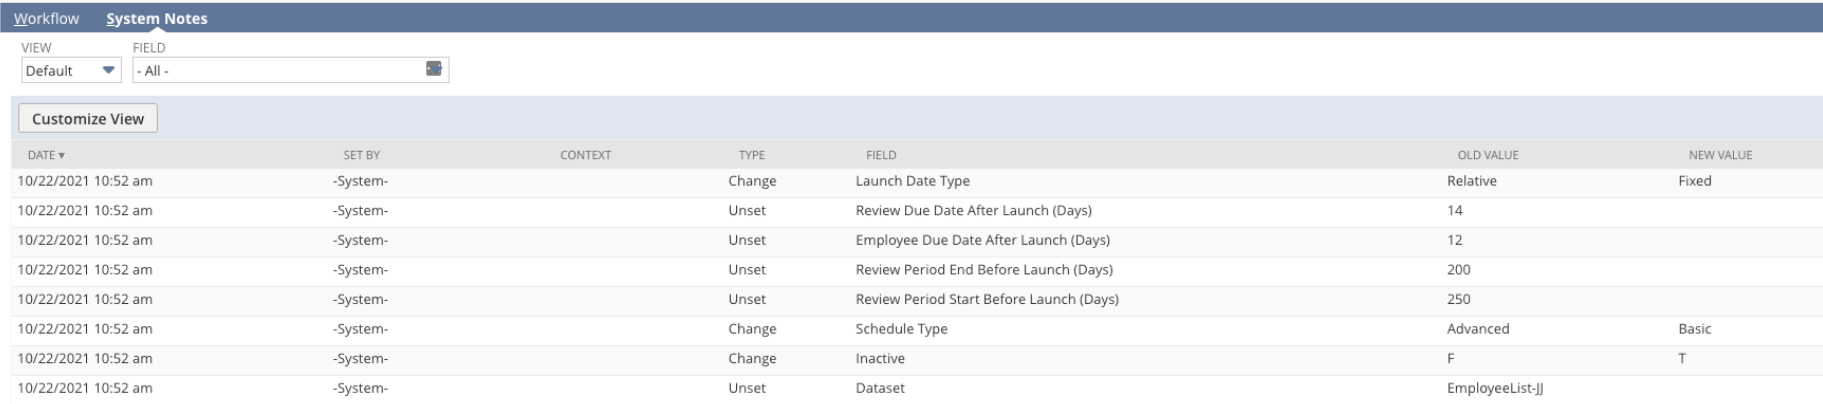 Screenshot showing the changes found in the System Notes tab of a performance review schedule when the SuiteAnalytics feature is turned off